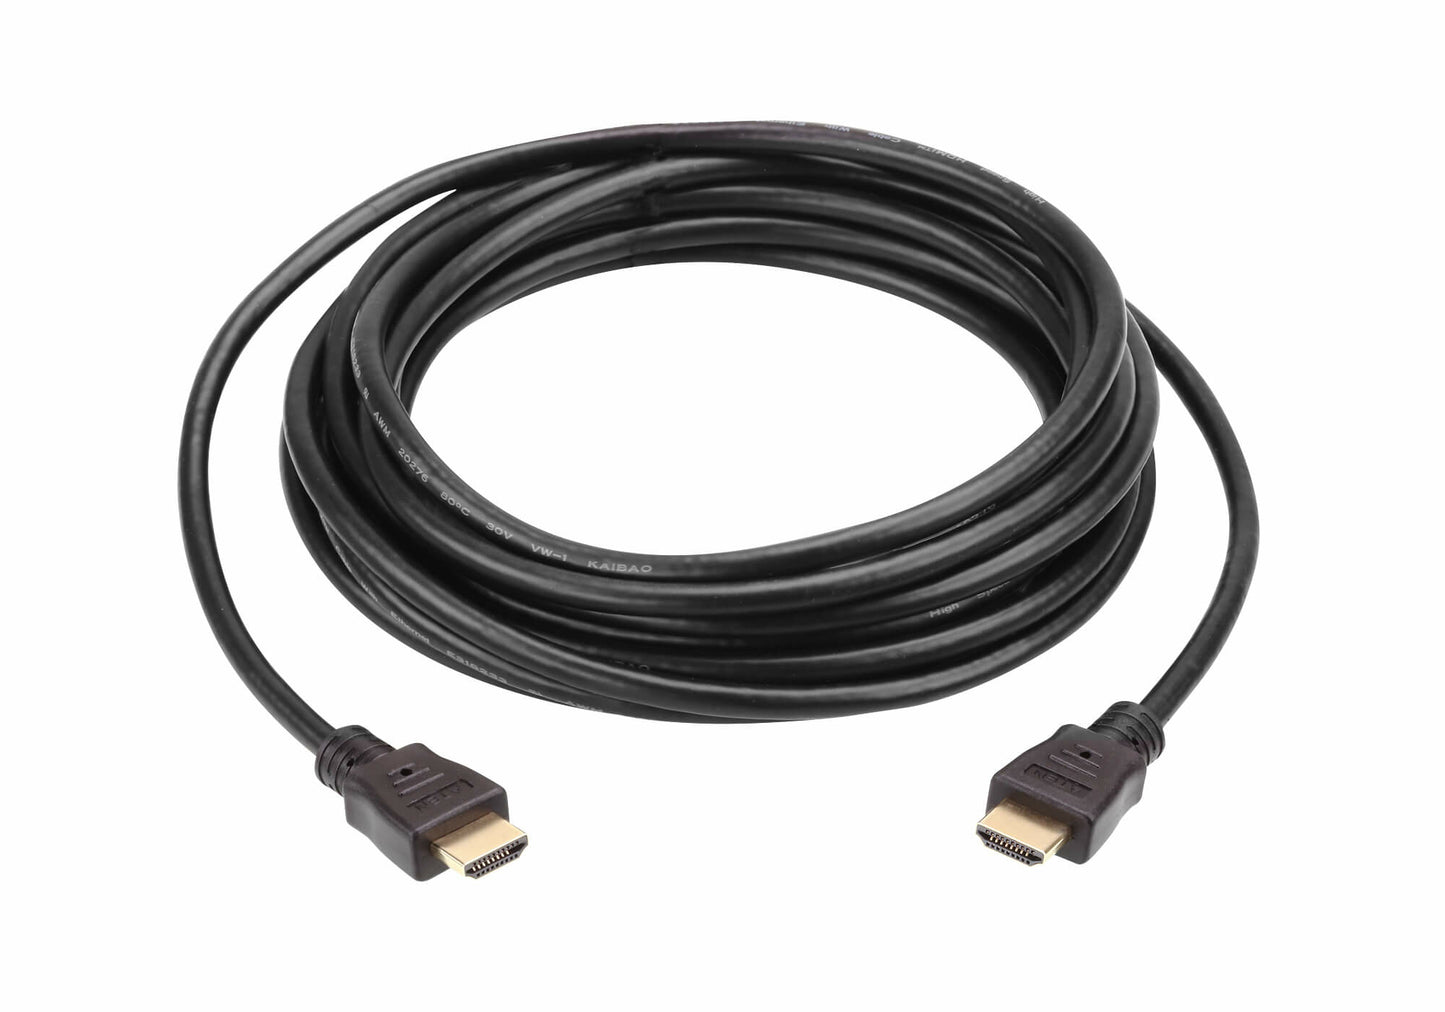 ATEN High Speed HDMI Cable with Ethernet True 4K ( 4096X2160 @ 60Hz); 2 m HDMI Cable with Ethernet-1